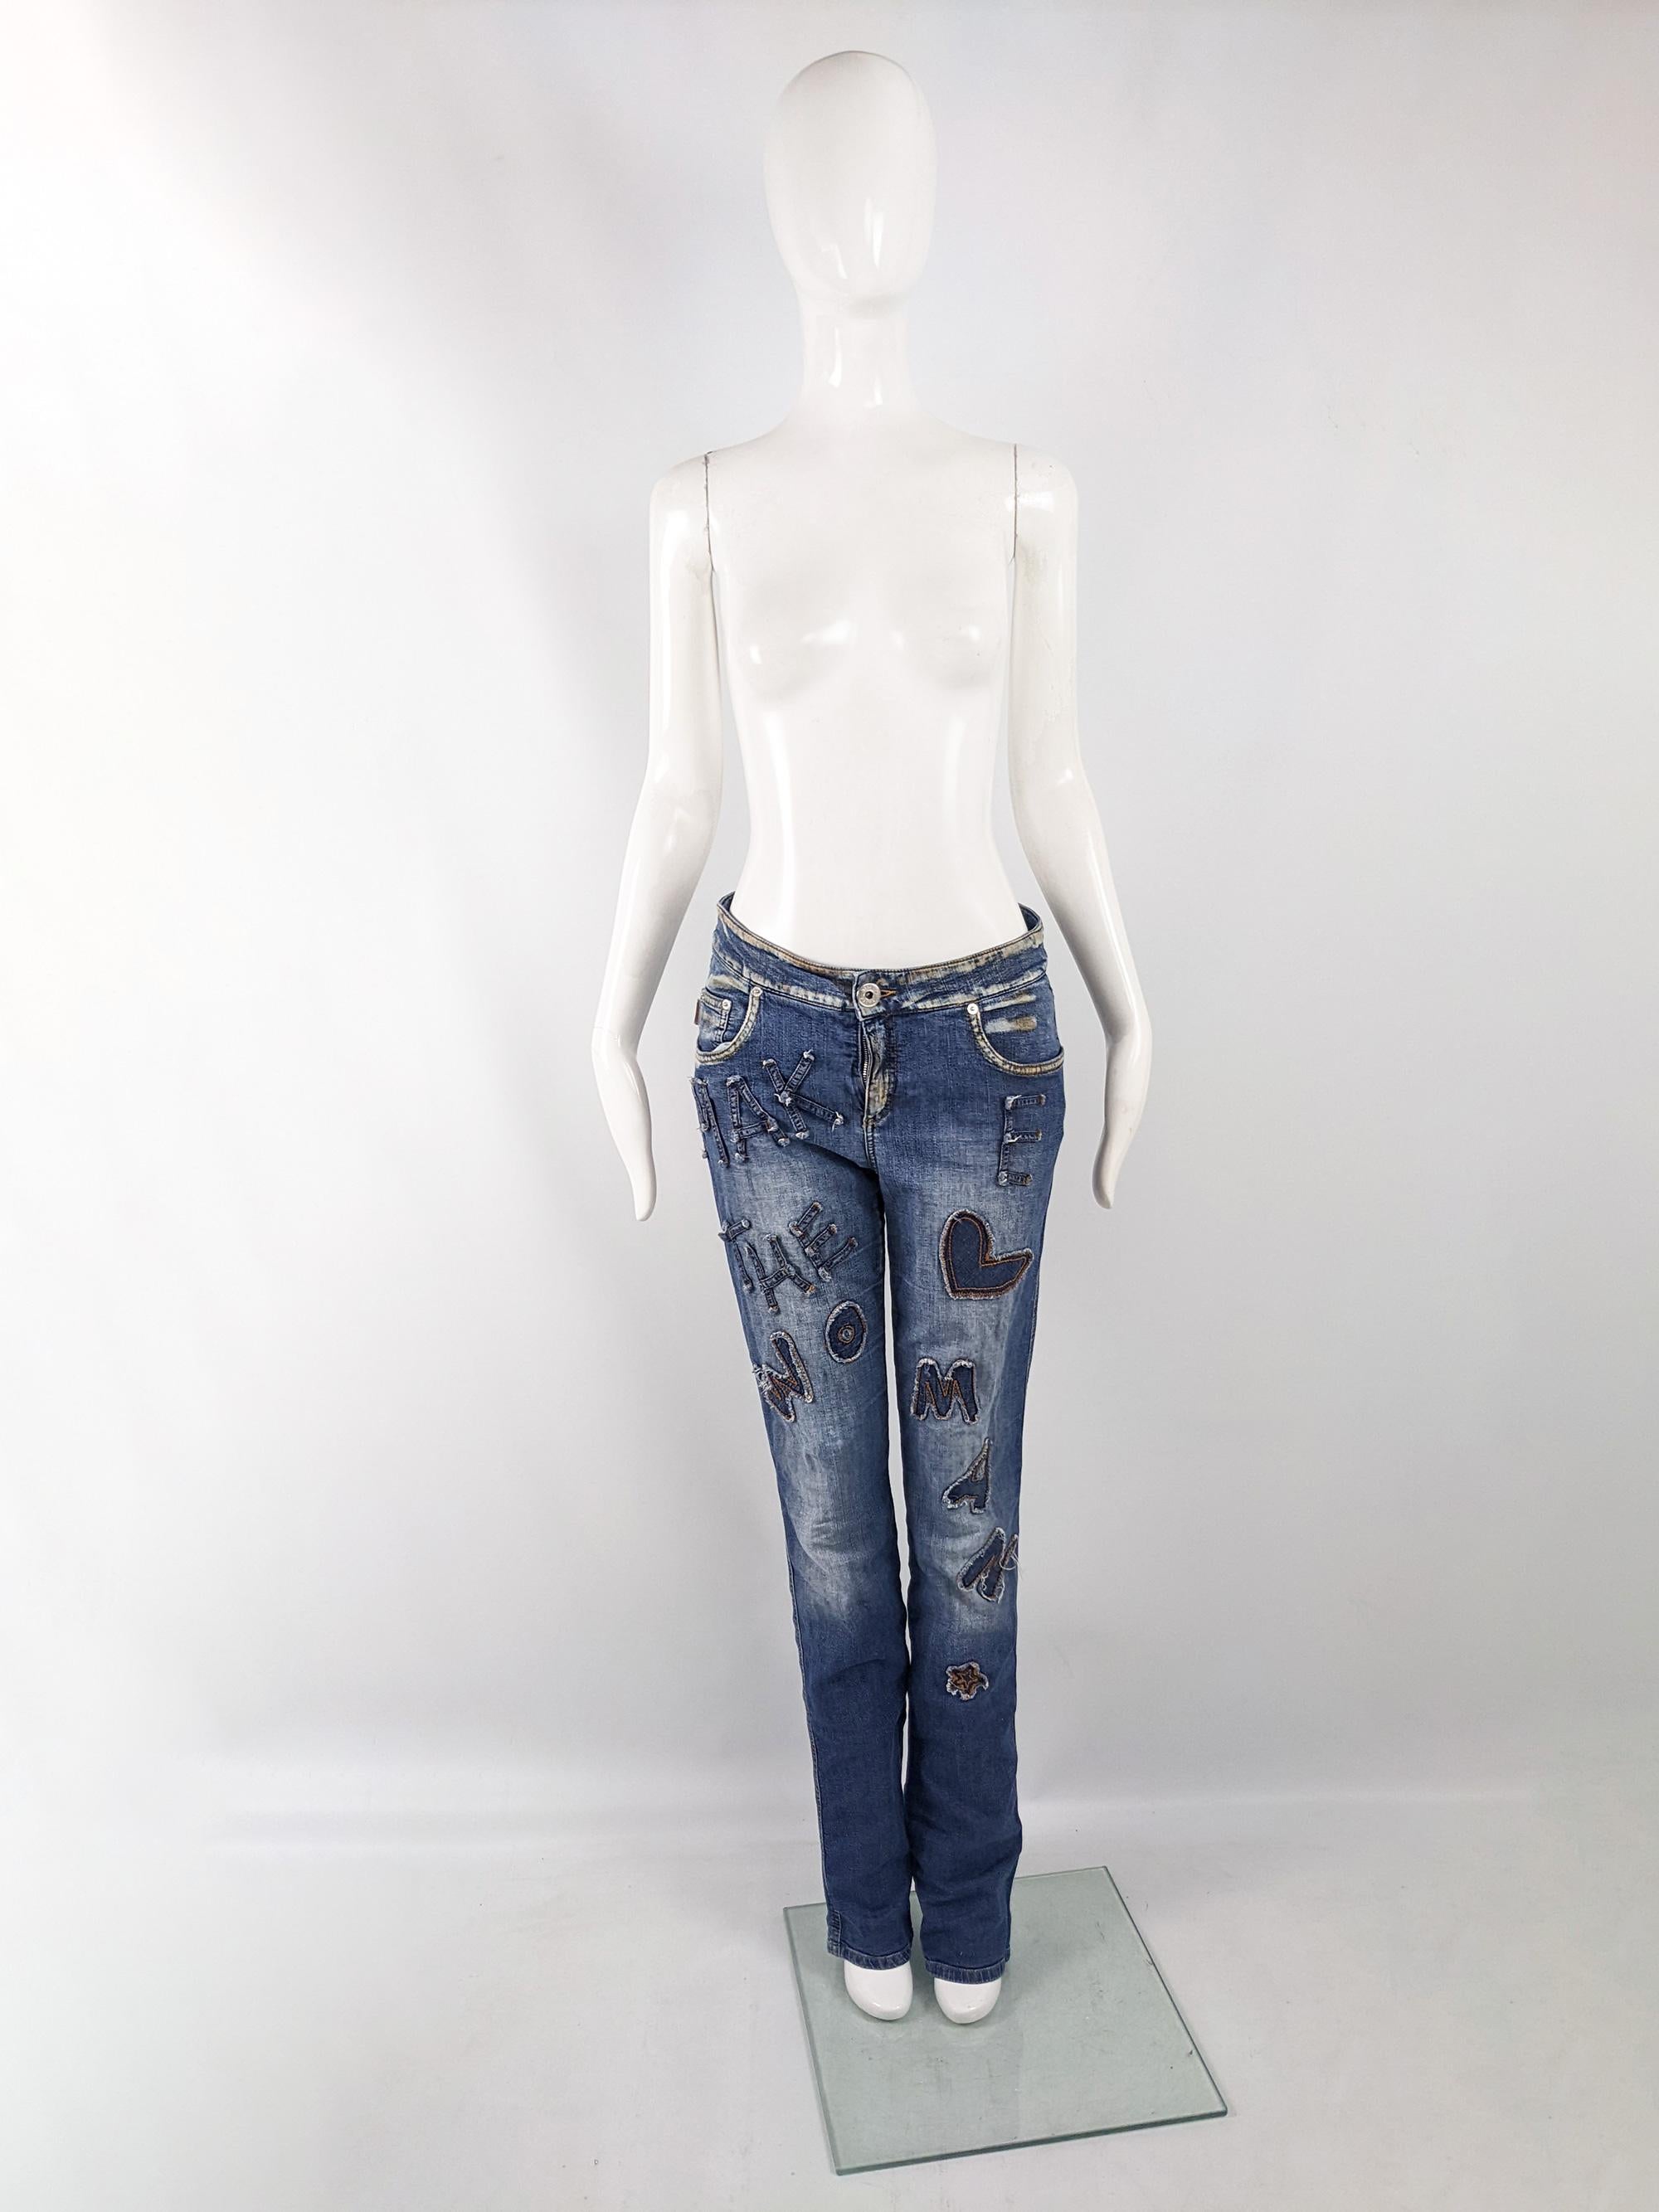 An incredible pair of vintage womens y2k jeans from the early 2000s by luxury Italian designer, Moschino. In a blue denim with a distressed look that is tinted brown in areas to give a grungy touch. They have an incredible silhouette with an extra